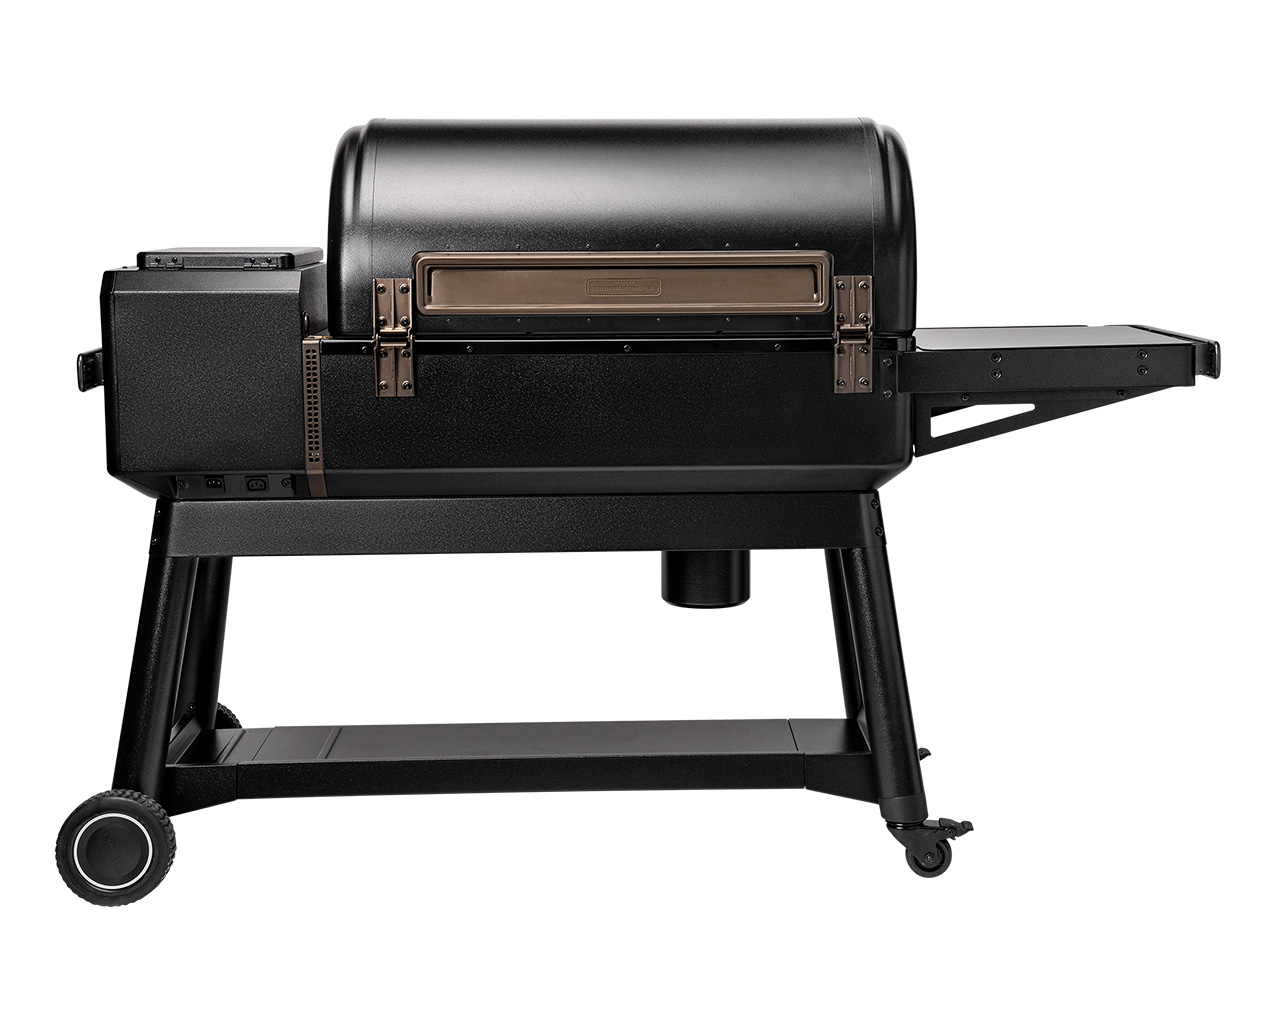 New Traeger Ironwood XL Pellet Smoker, , hi-res image number null